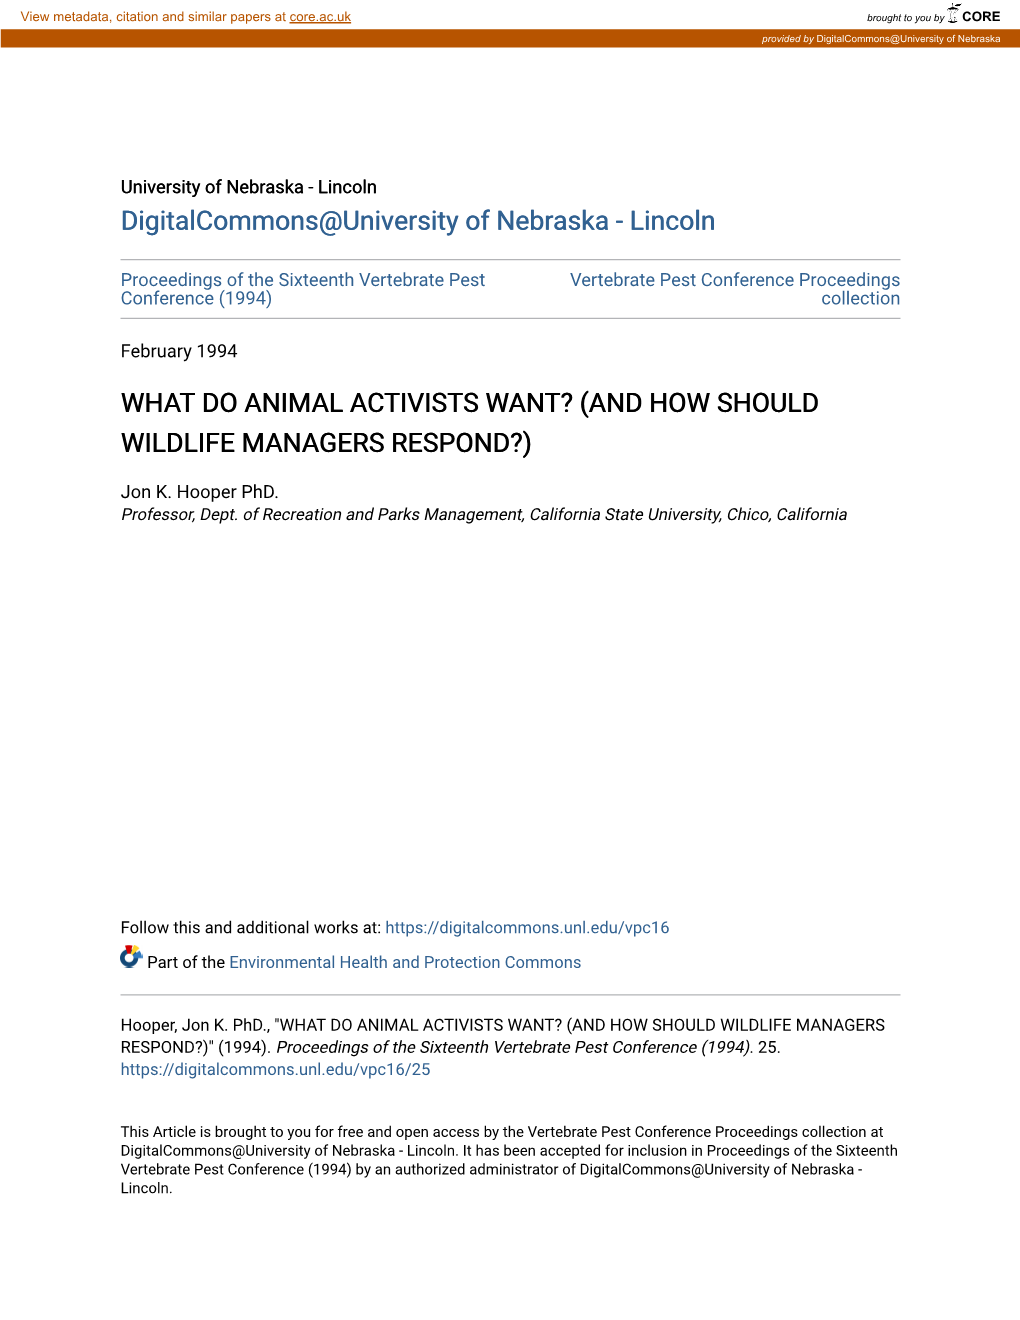 What Do Animal Activists Want? (And How Should Wildlife Managers Respond?)